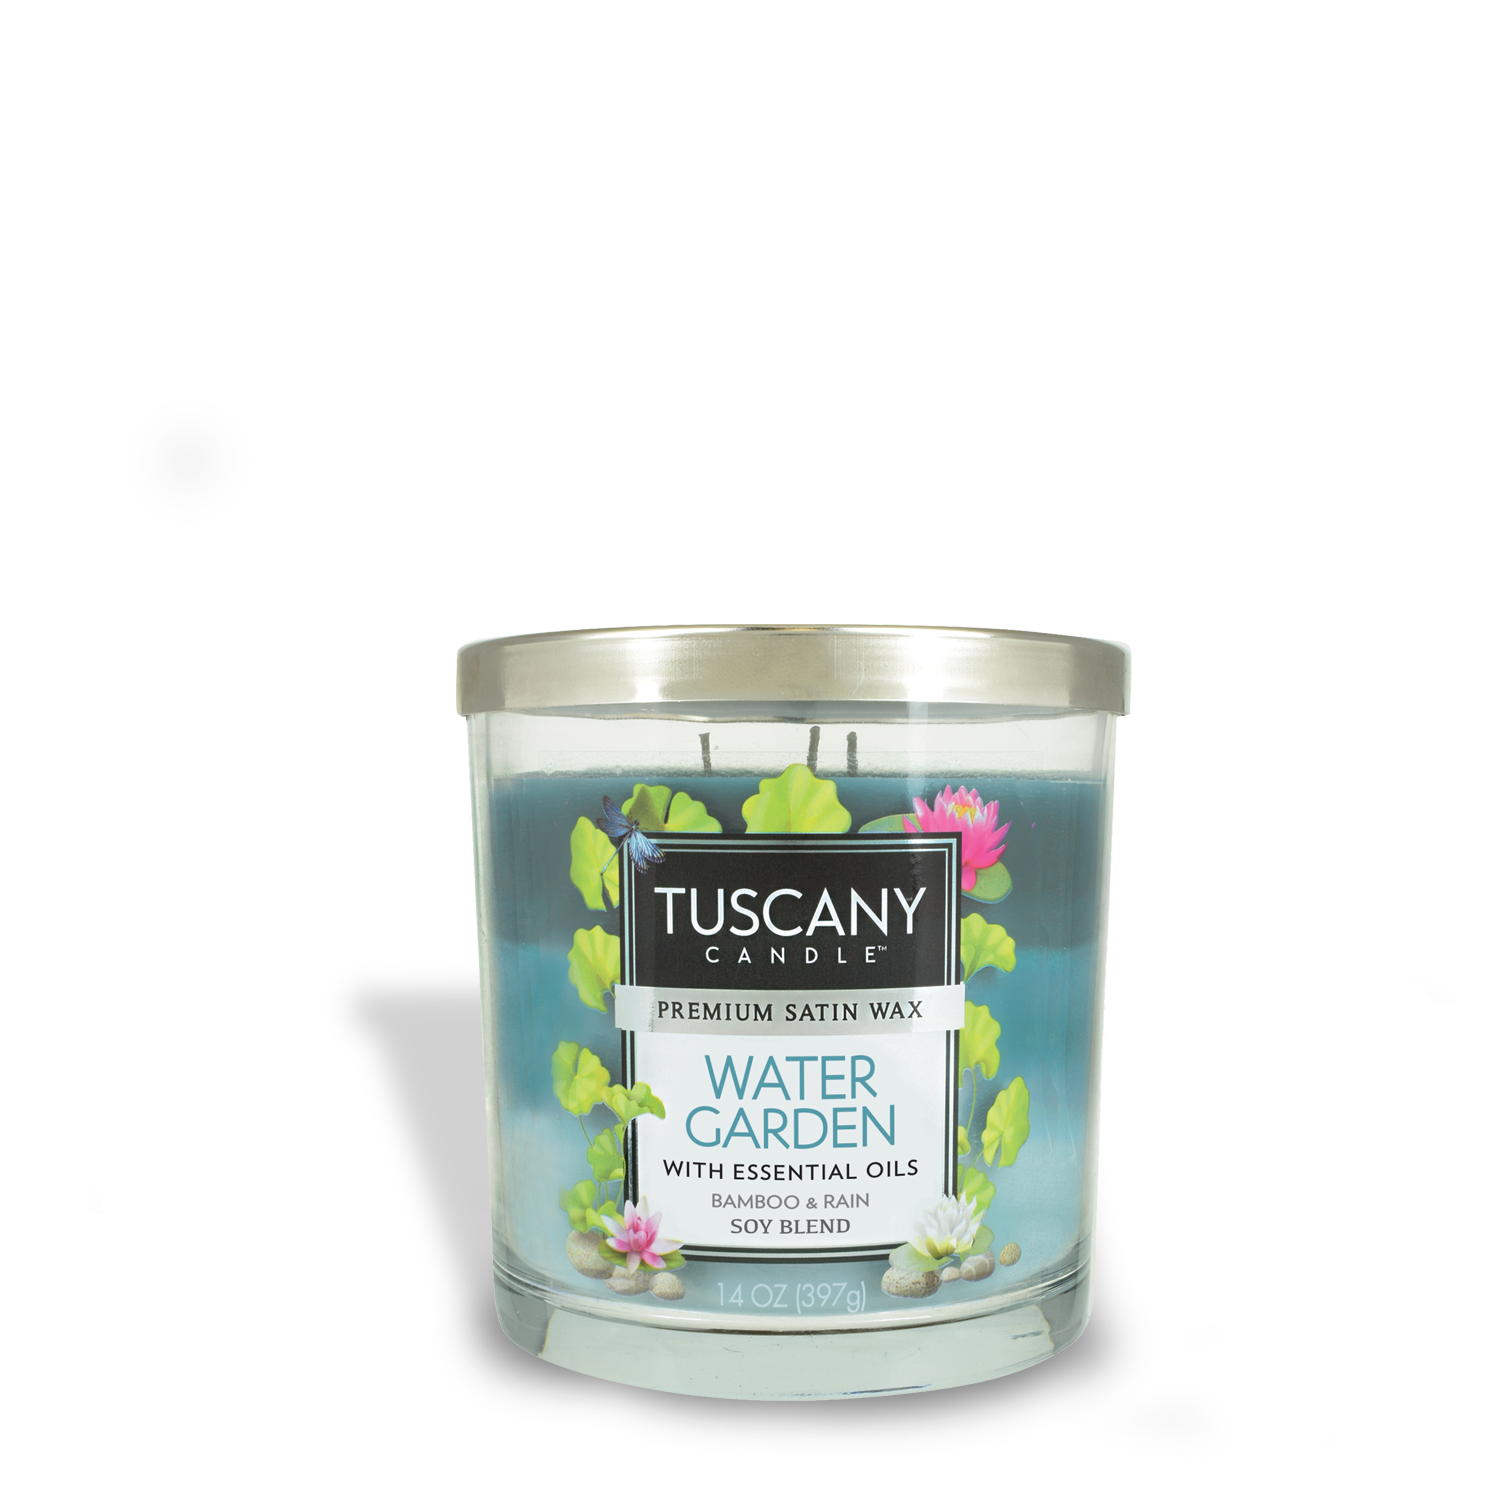 Water Garden Long-Lasting Scented Jar Candle (14 oz) by Tuscany Candle® EVD infused with essential oils for a clean burn experience.